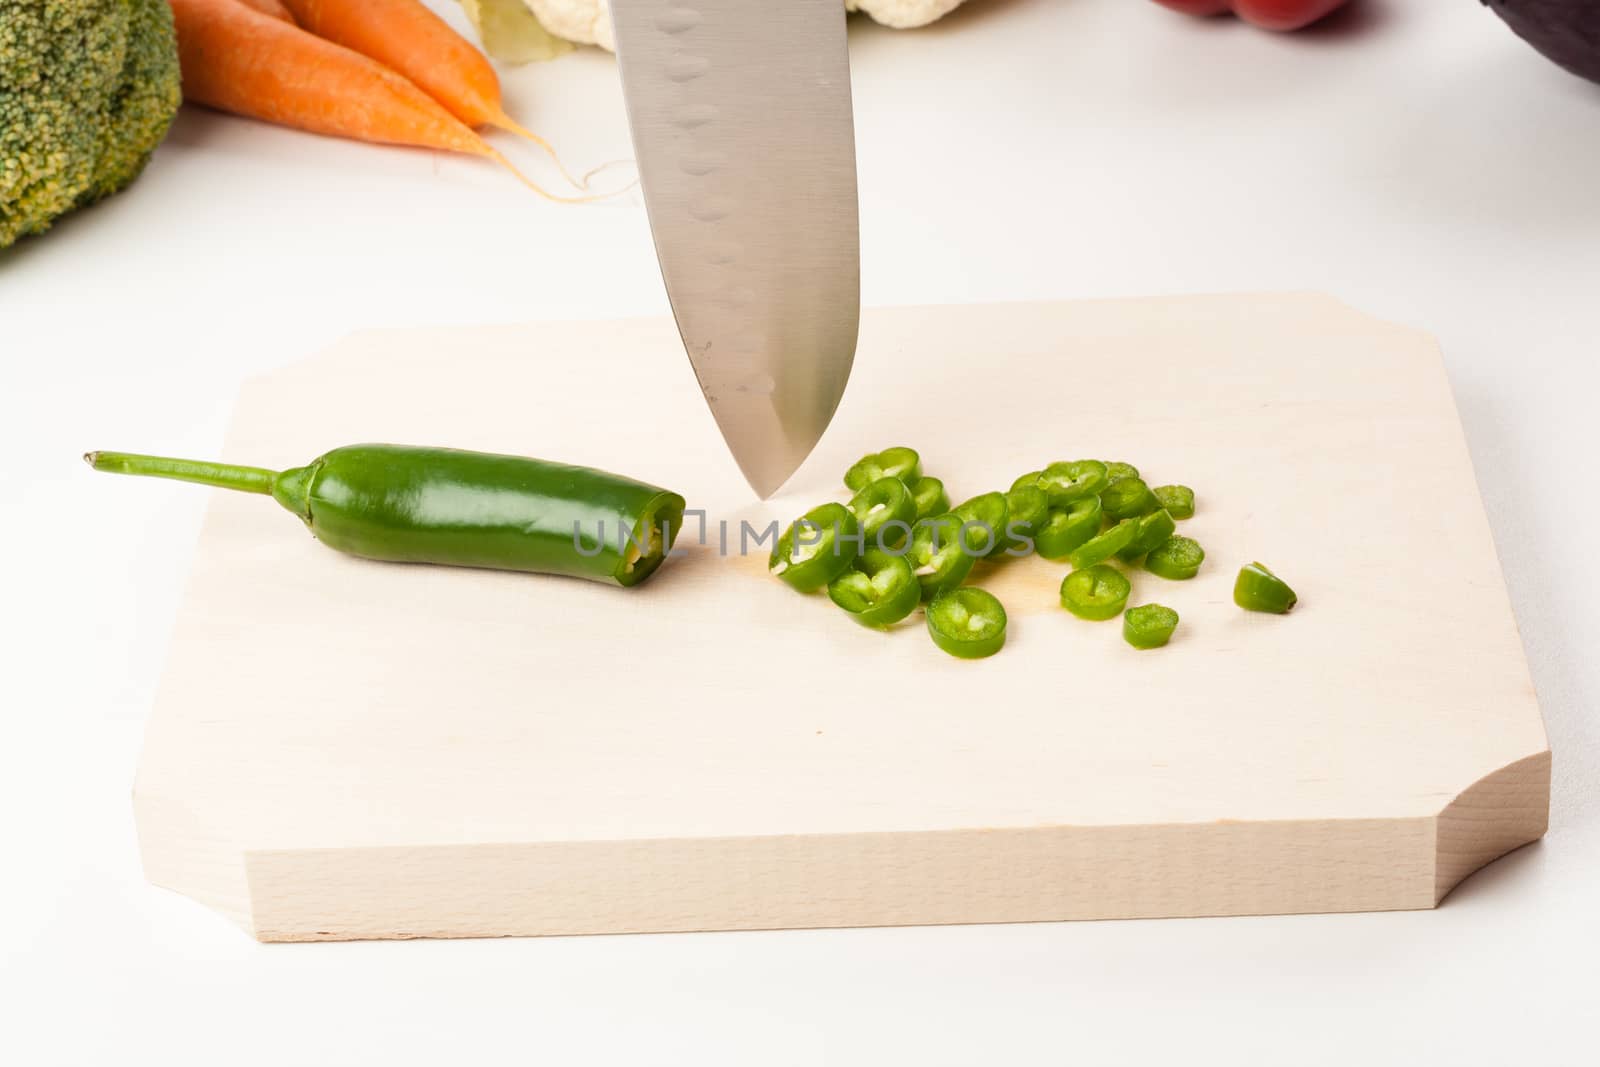 pepper on cutting board with different vegetables in the background